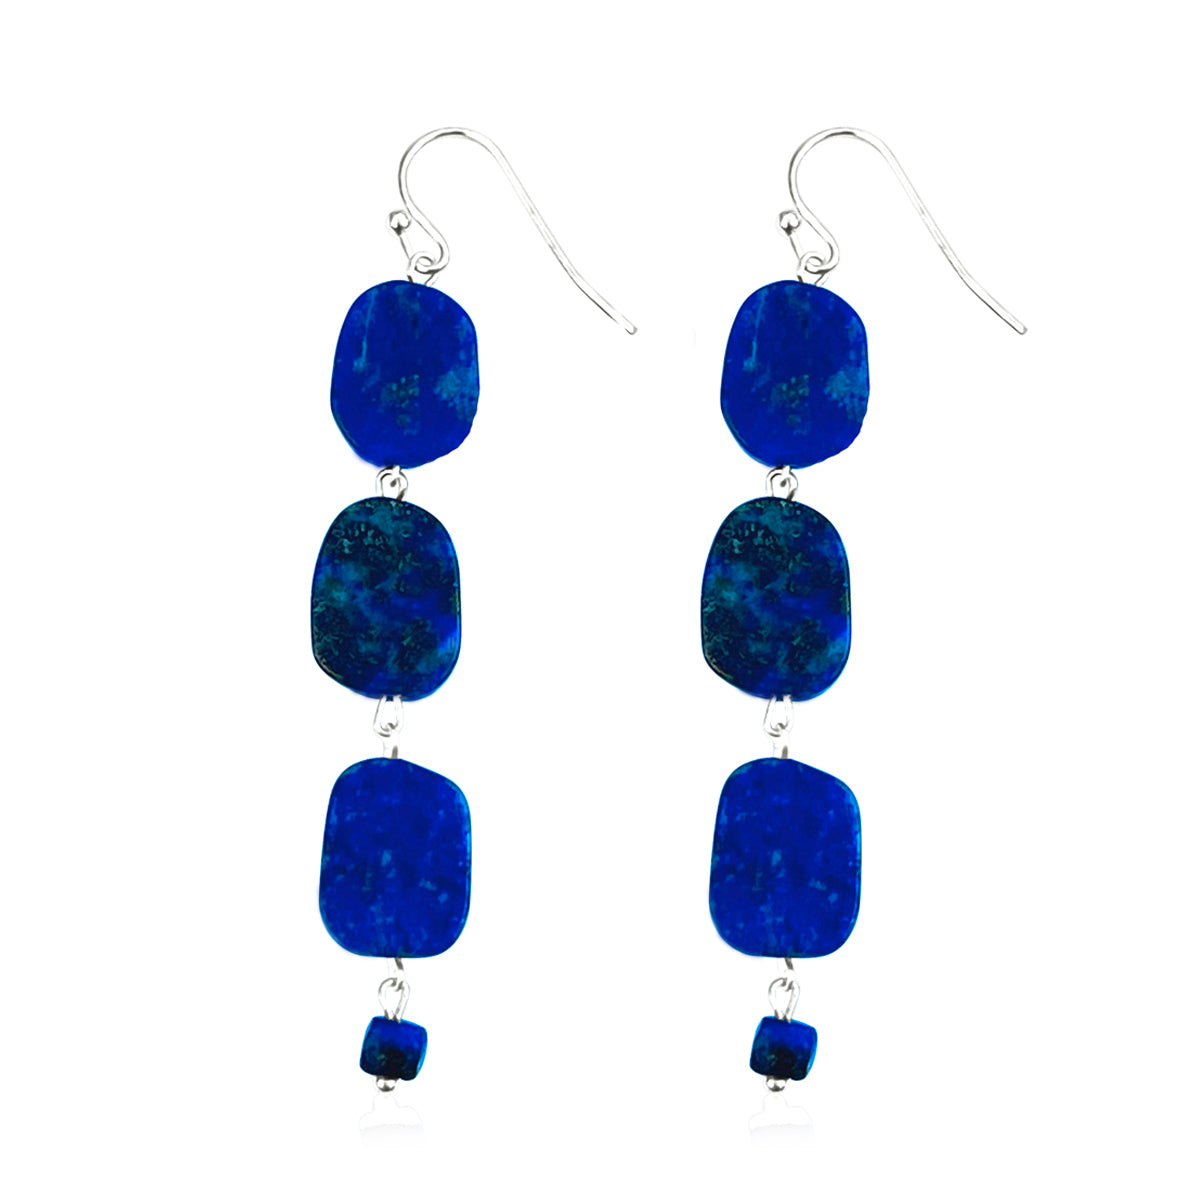 Step into a world of vibrant expression with our "Colorful Confidence - Lapis Lazuli Earrings." These aren't just earrings; they're a radiant celebration of joy, style, and the captivating energy of Lapis Lazuli gemstones.